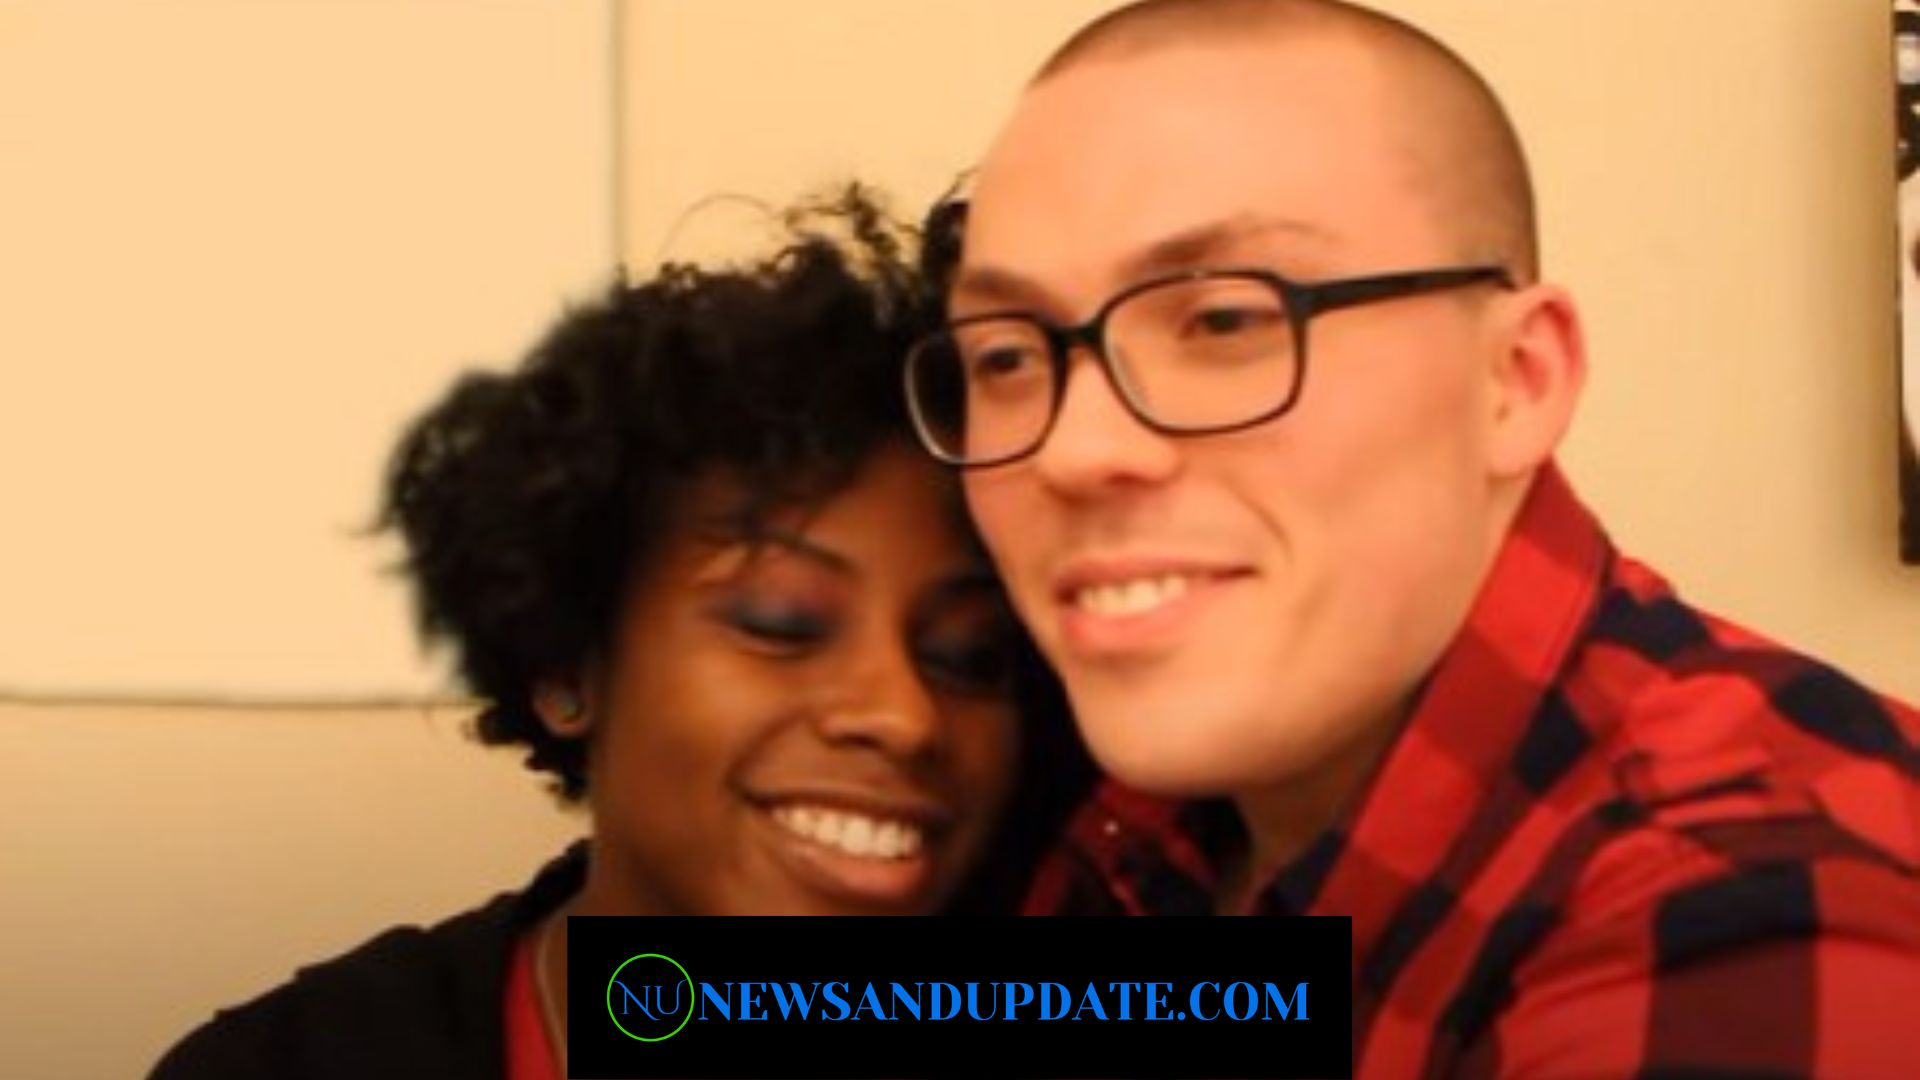 All About Anthony Fantano Divorce From Wife Dominique Boxley!